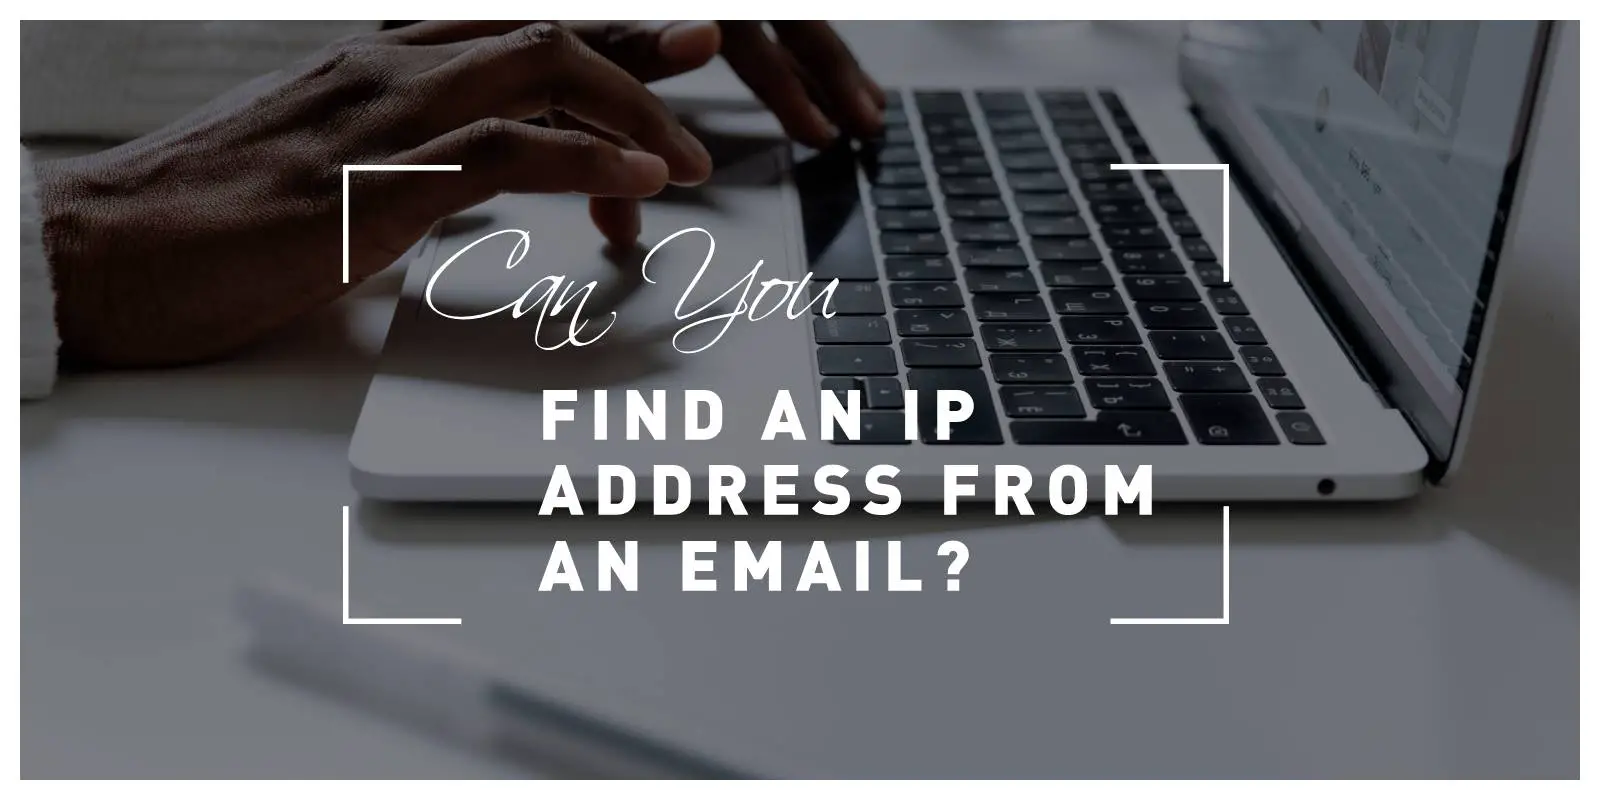 Can you find an IP address from an email